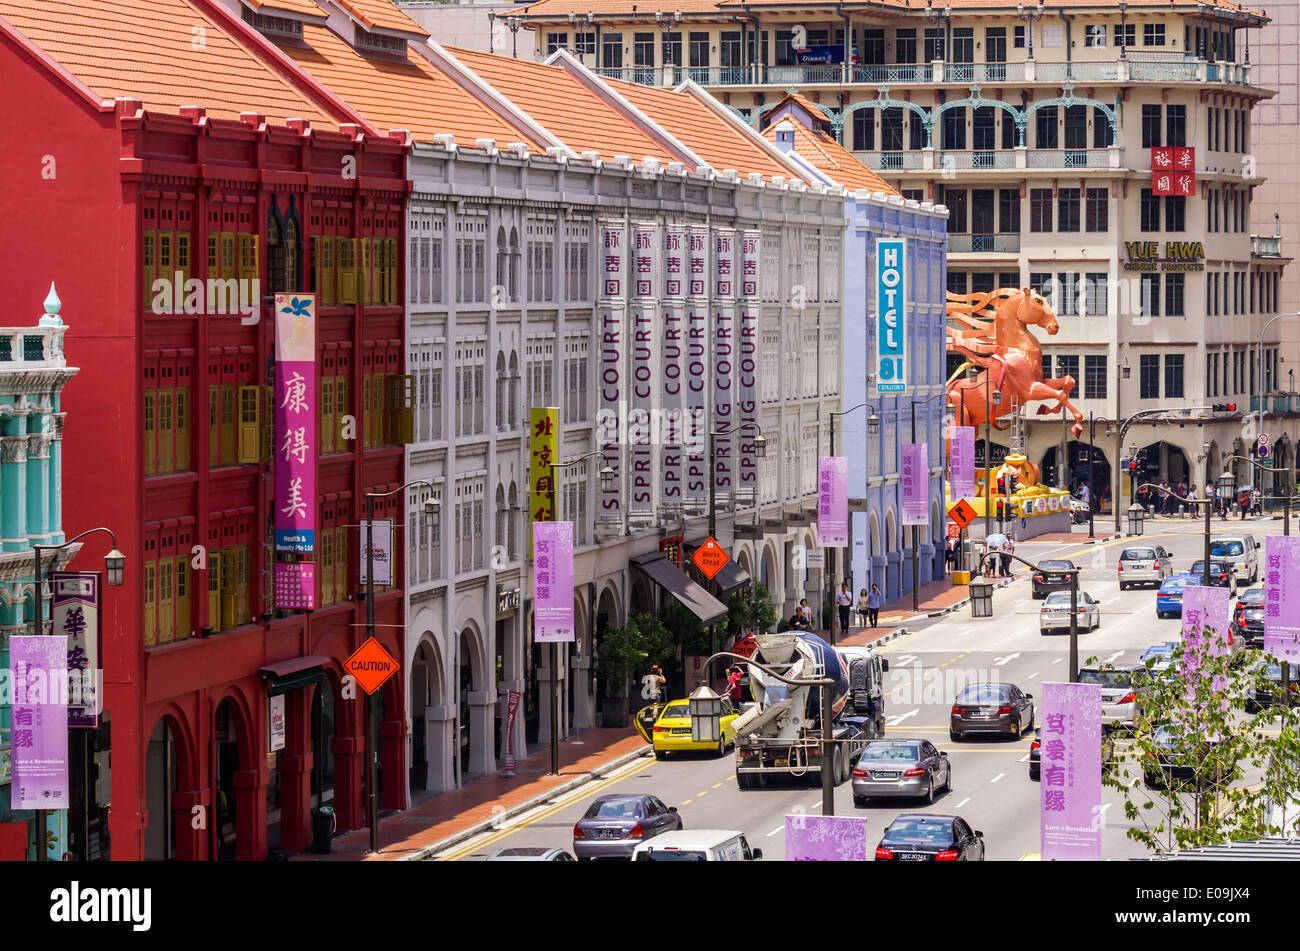 Singapore, Chinatown, view to row of old buildings along a street Stock Photo